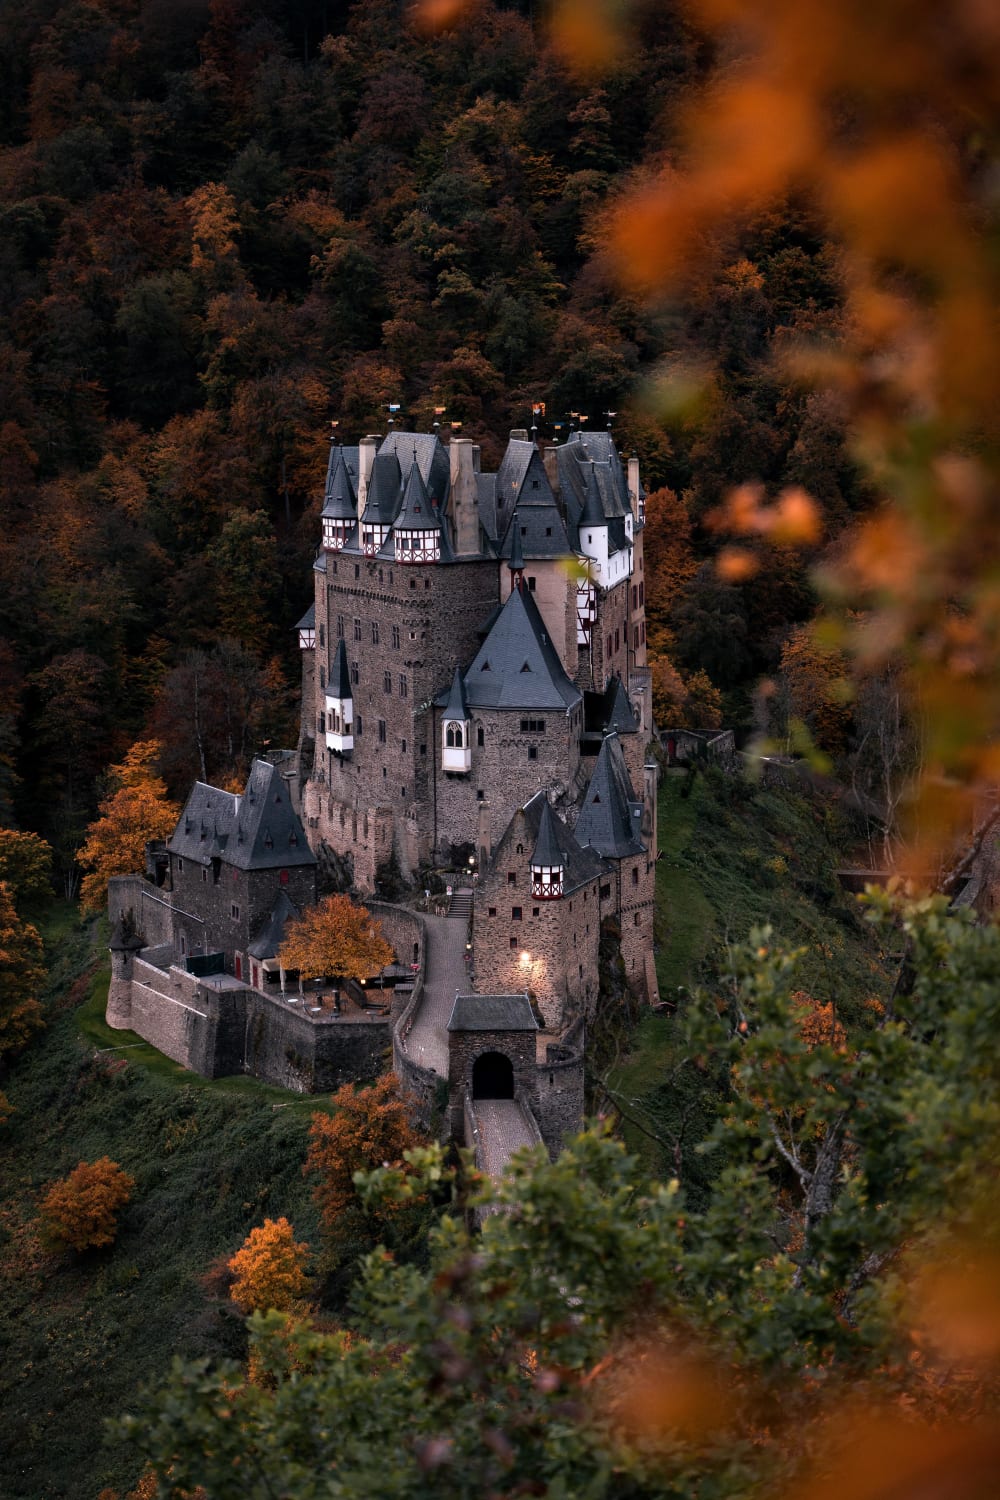 ITAP of a famous German castle in autumn